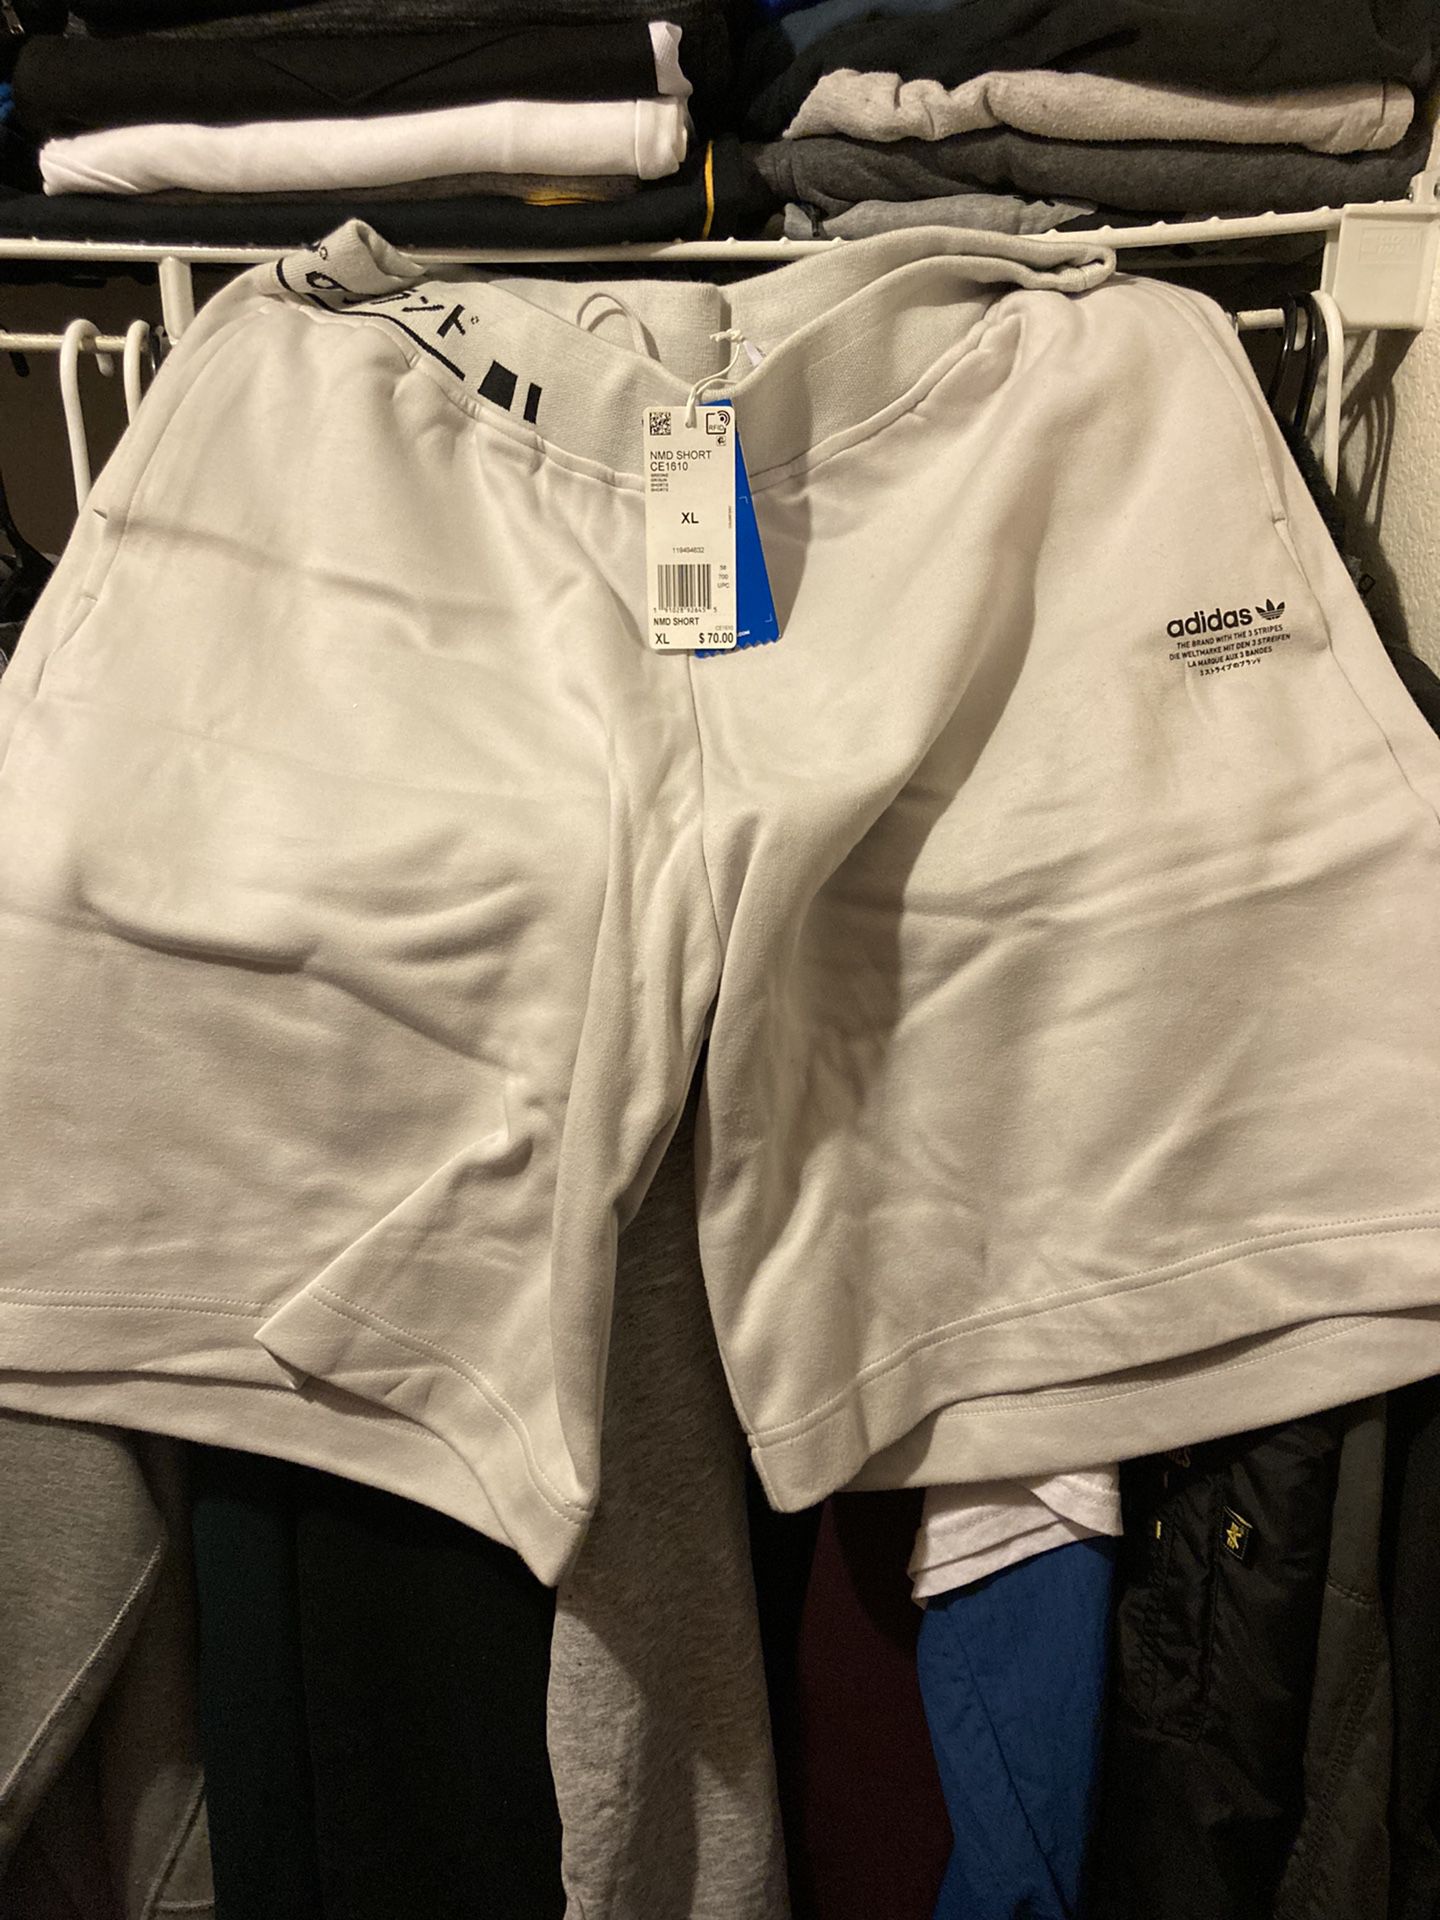 Adidas Nmd Shorts Size XL White for Sale in Burien, Washington - OfferUp